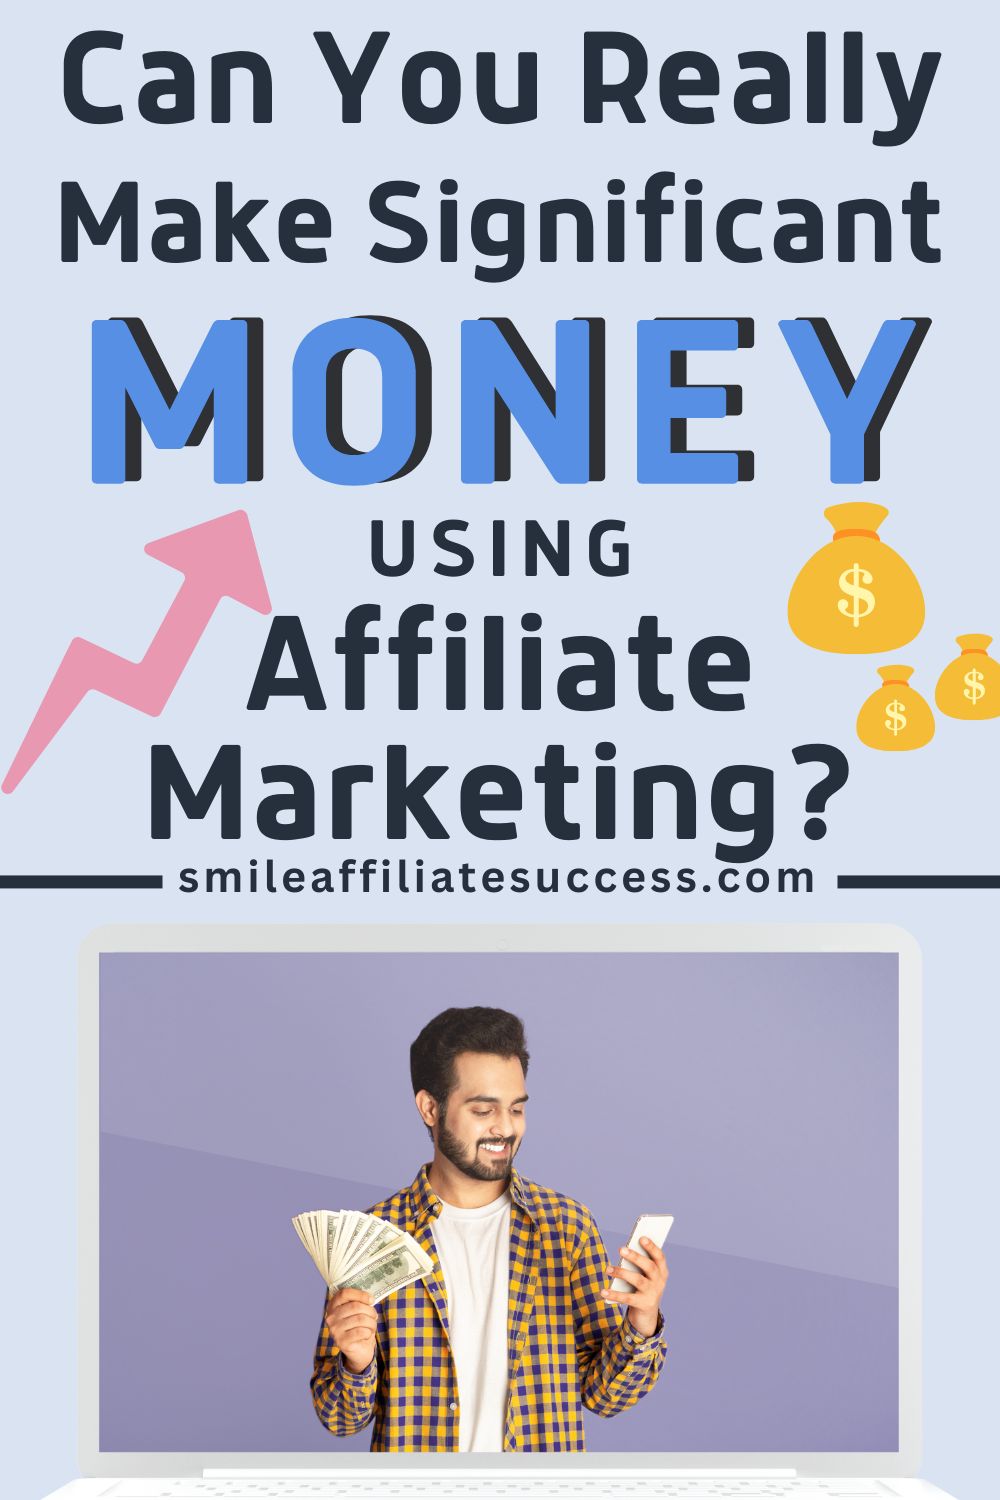 Can You Really Make Significant Money Using Affiliate Marketing?